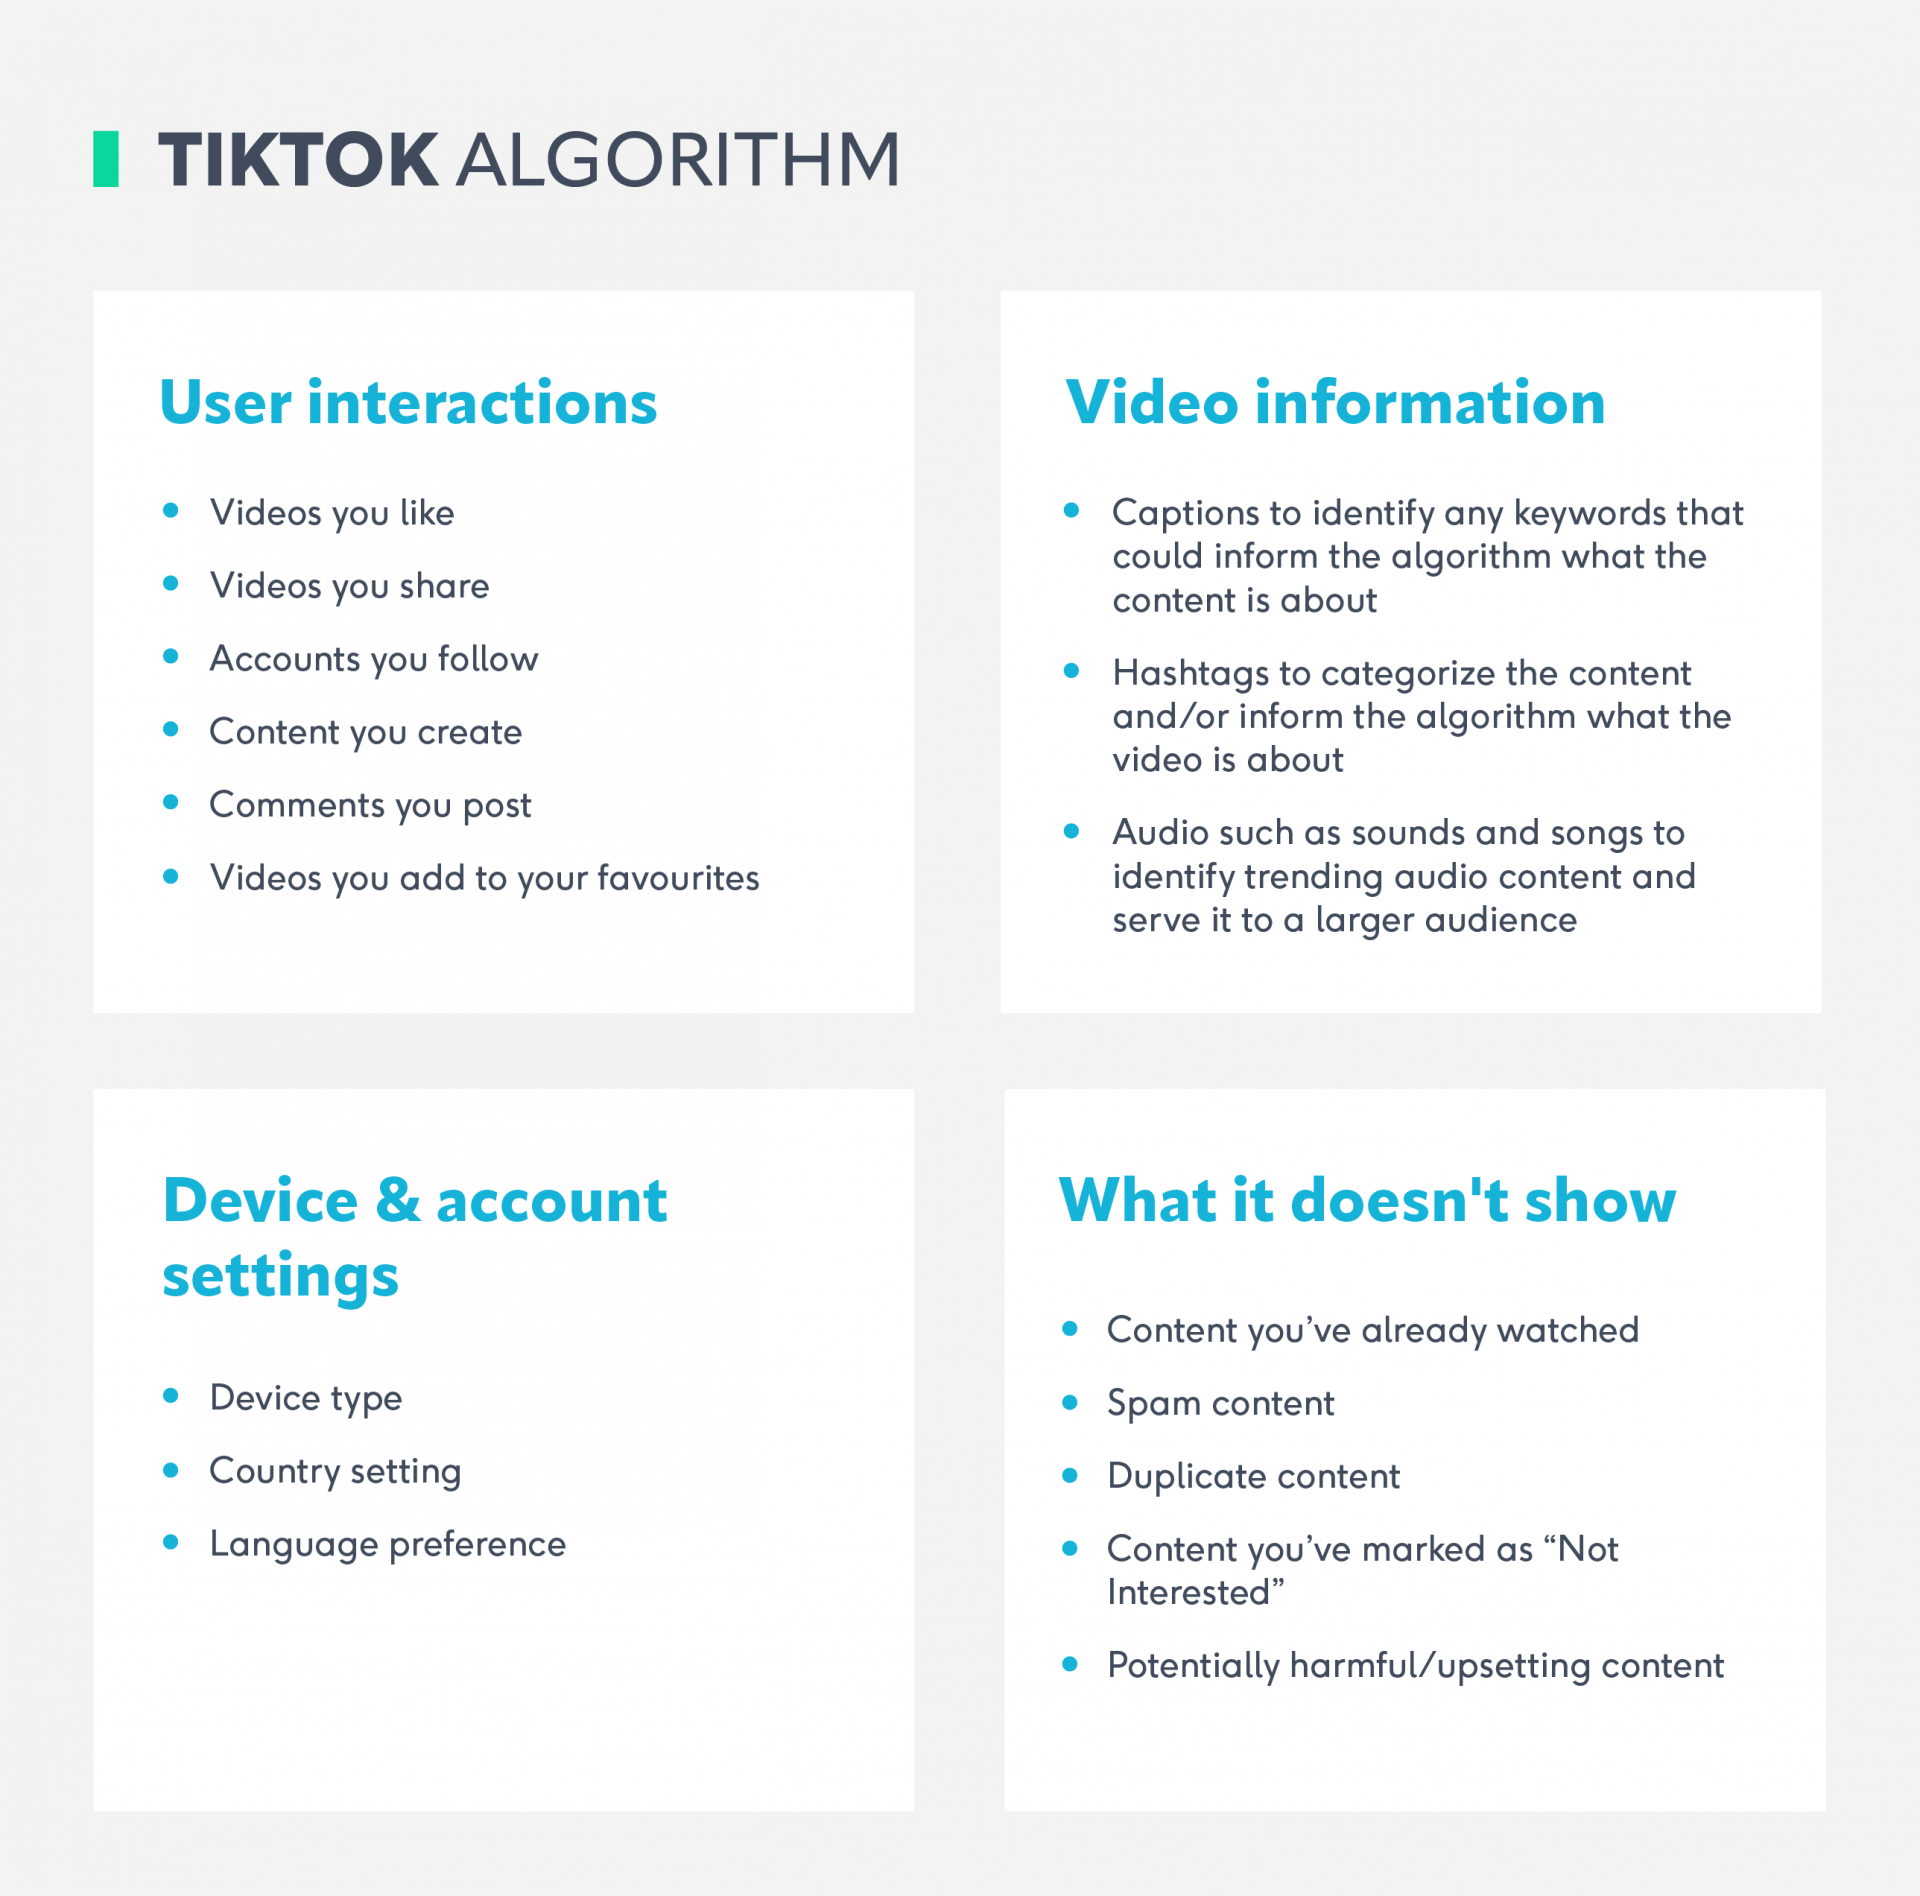 TikTok algorithm diagram showing what users see and don't see